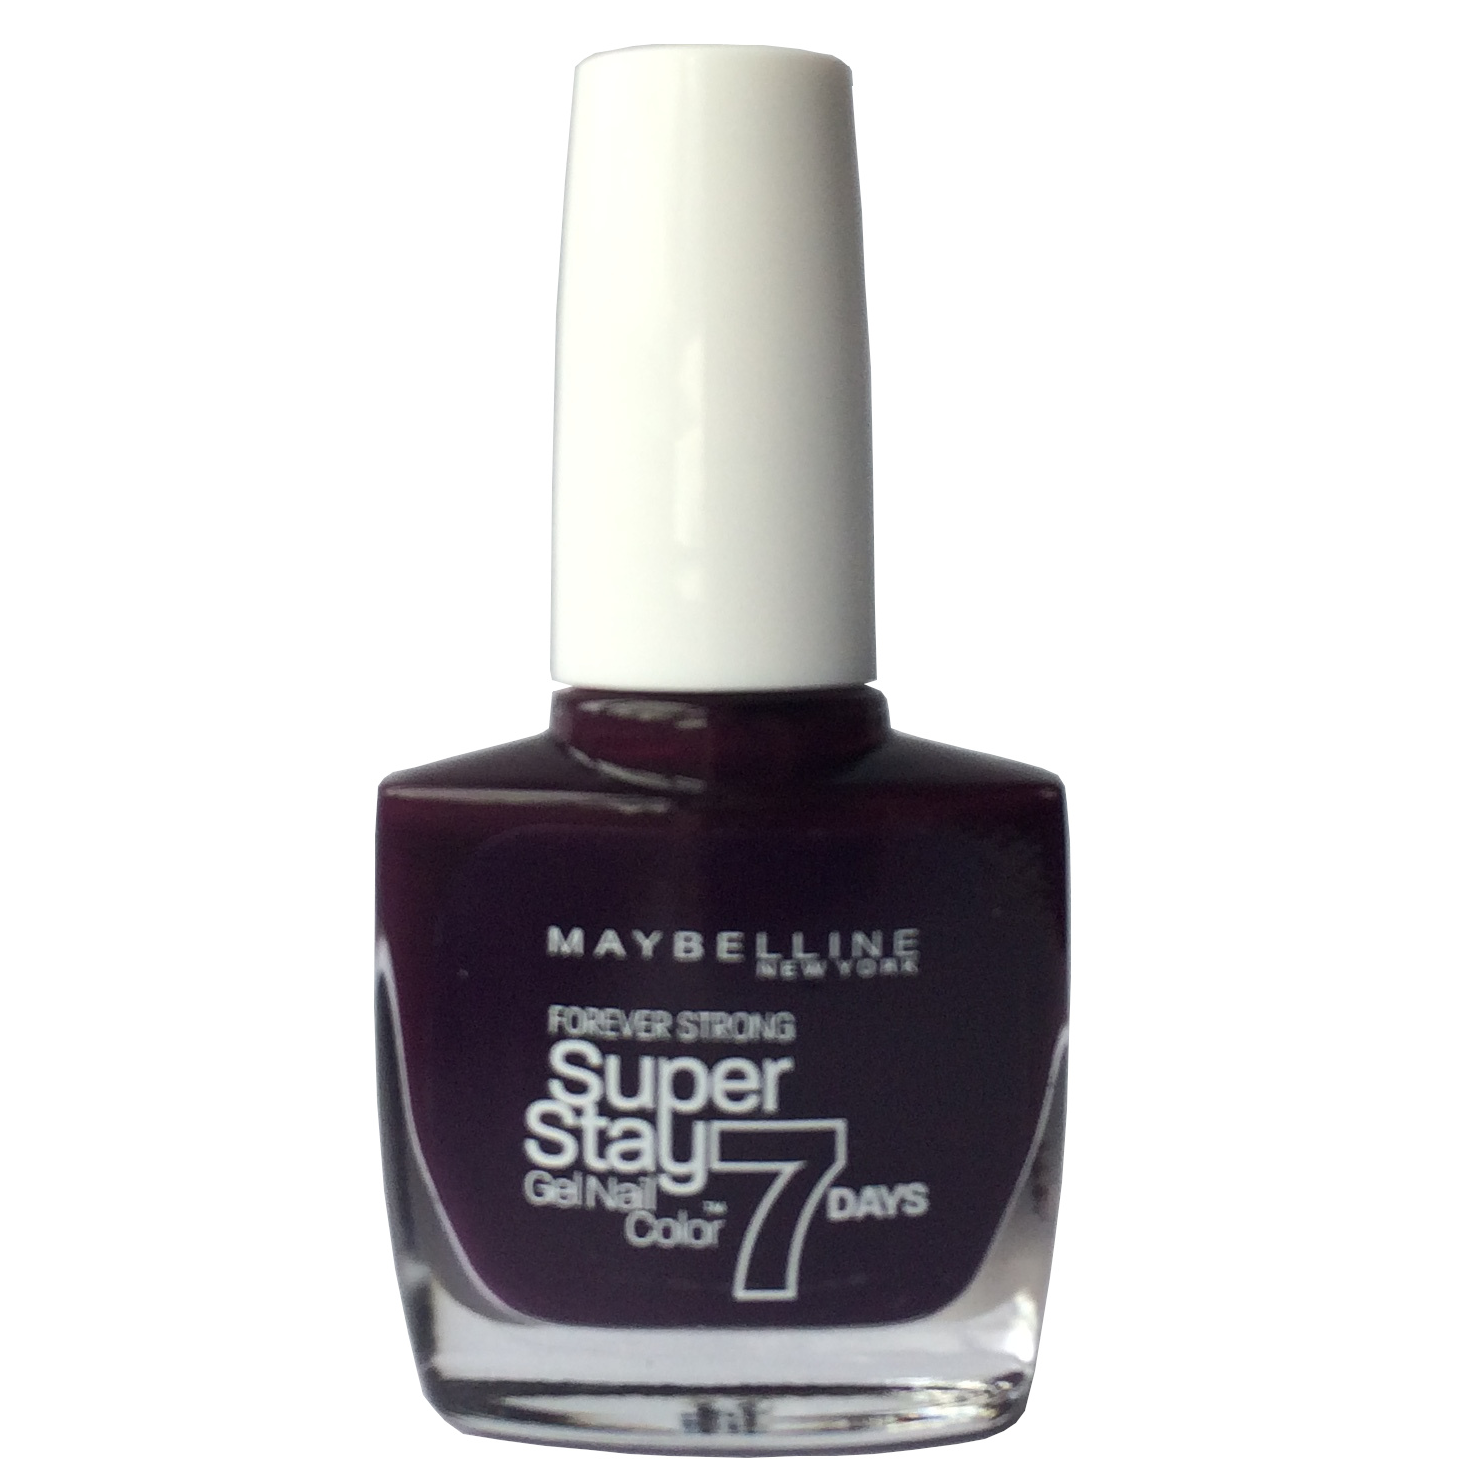 Maybelline Super Stay Gel Nail North Beauty Polish East 